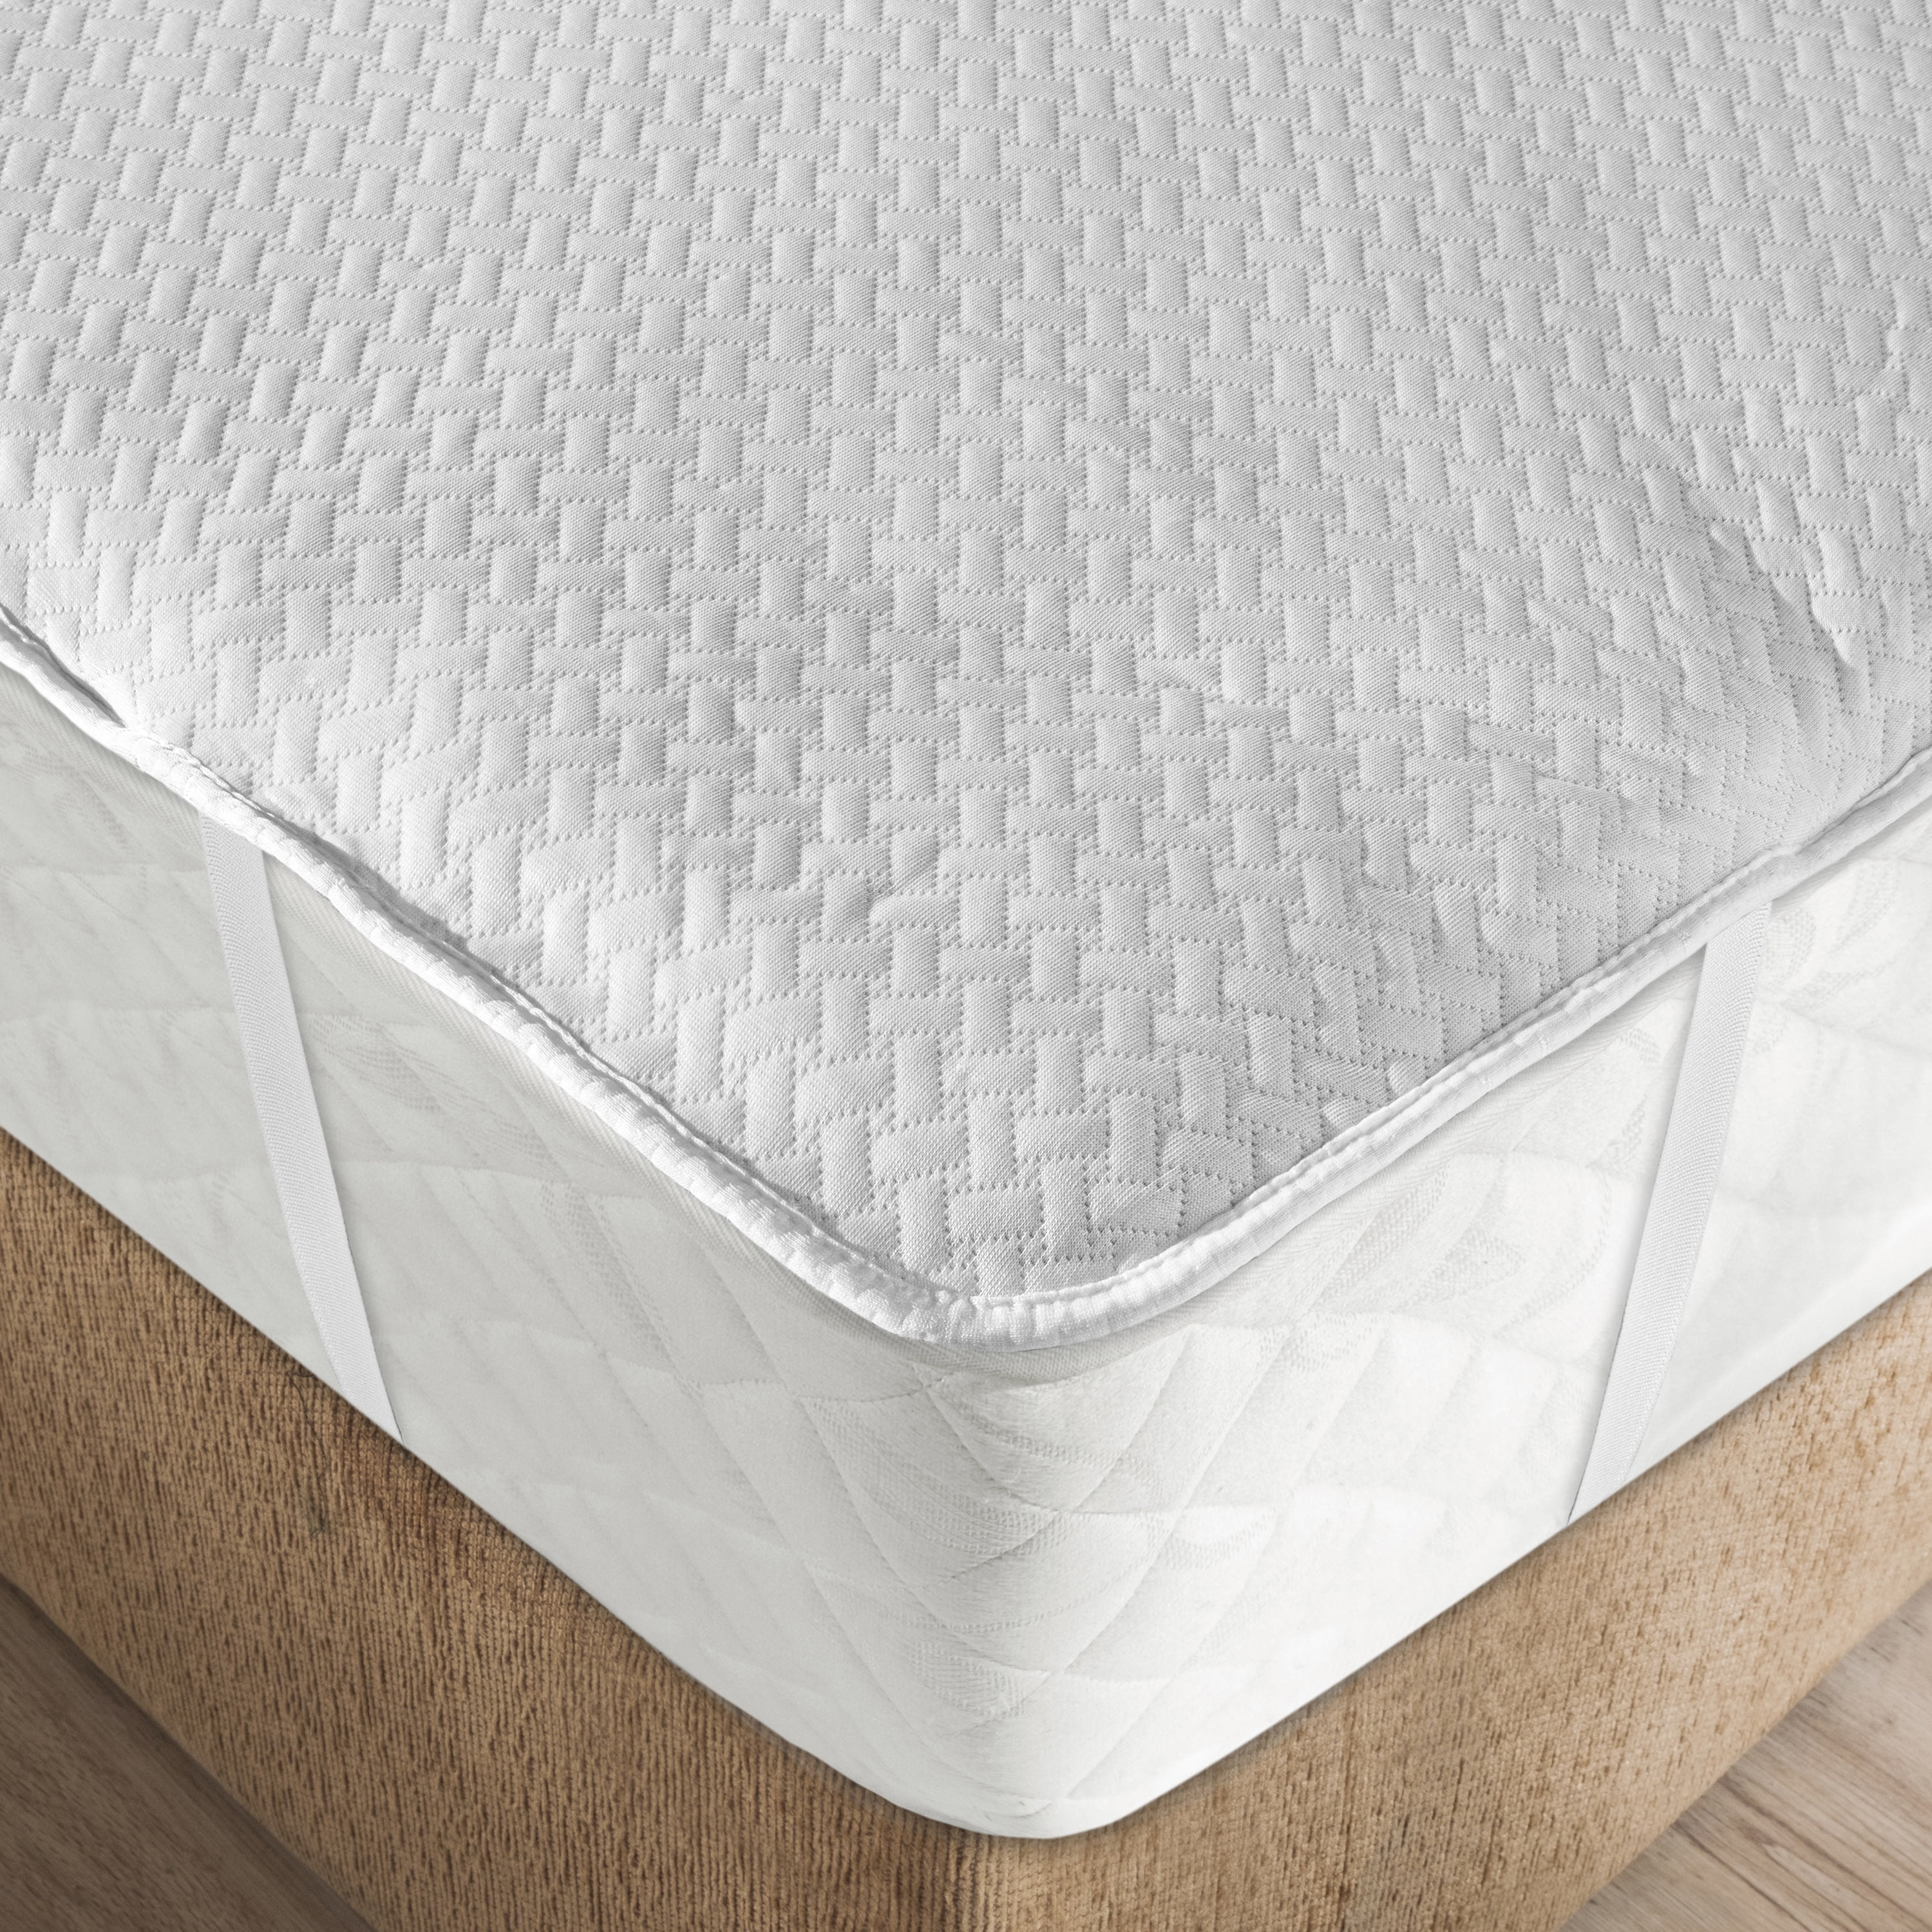 Terry Towel Mattress Protector Bed Sheet Cover Waterproof Fully Fitted Single 